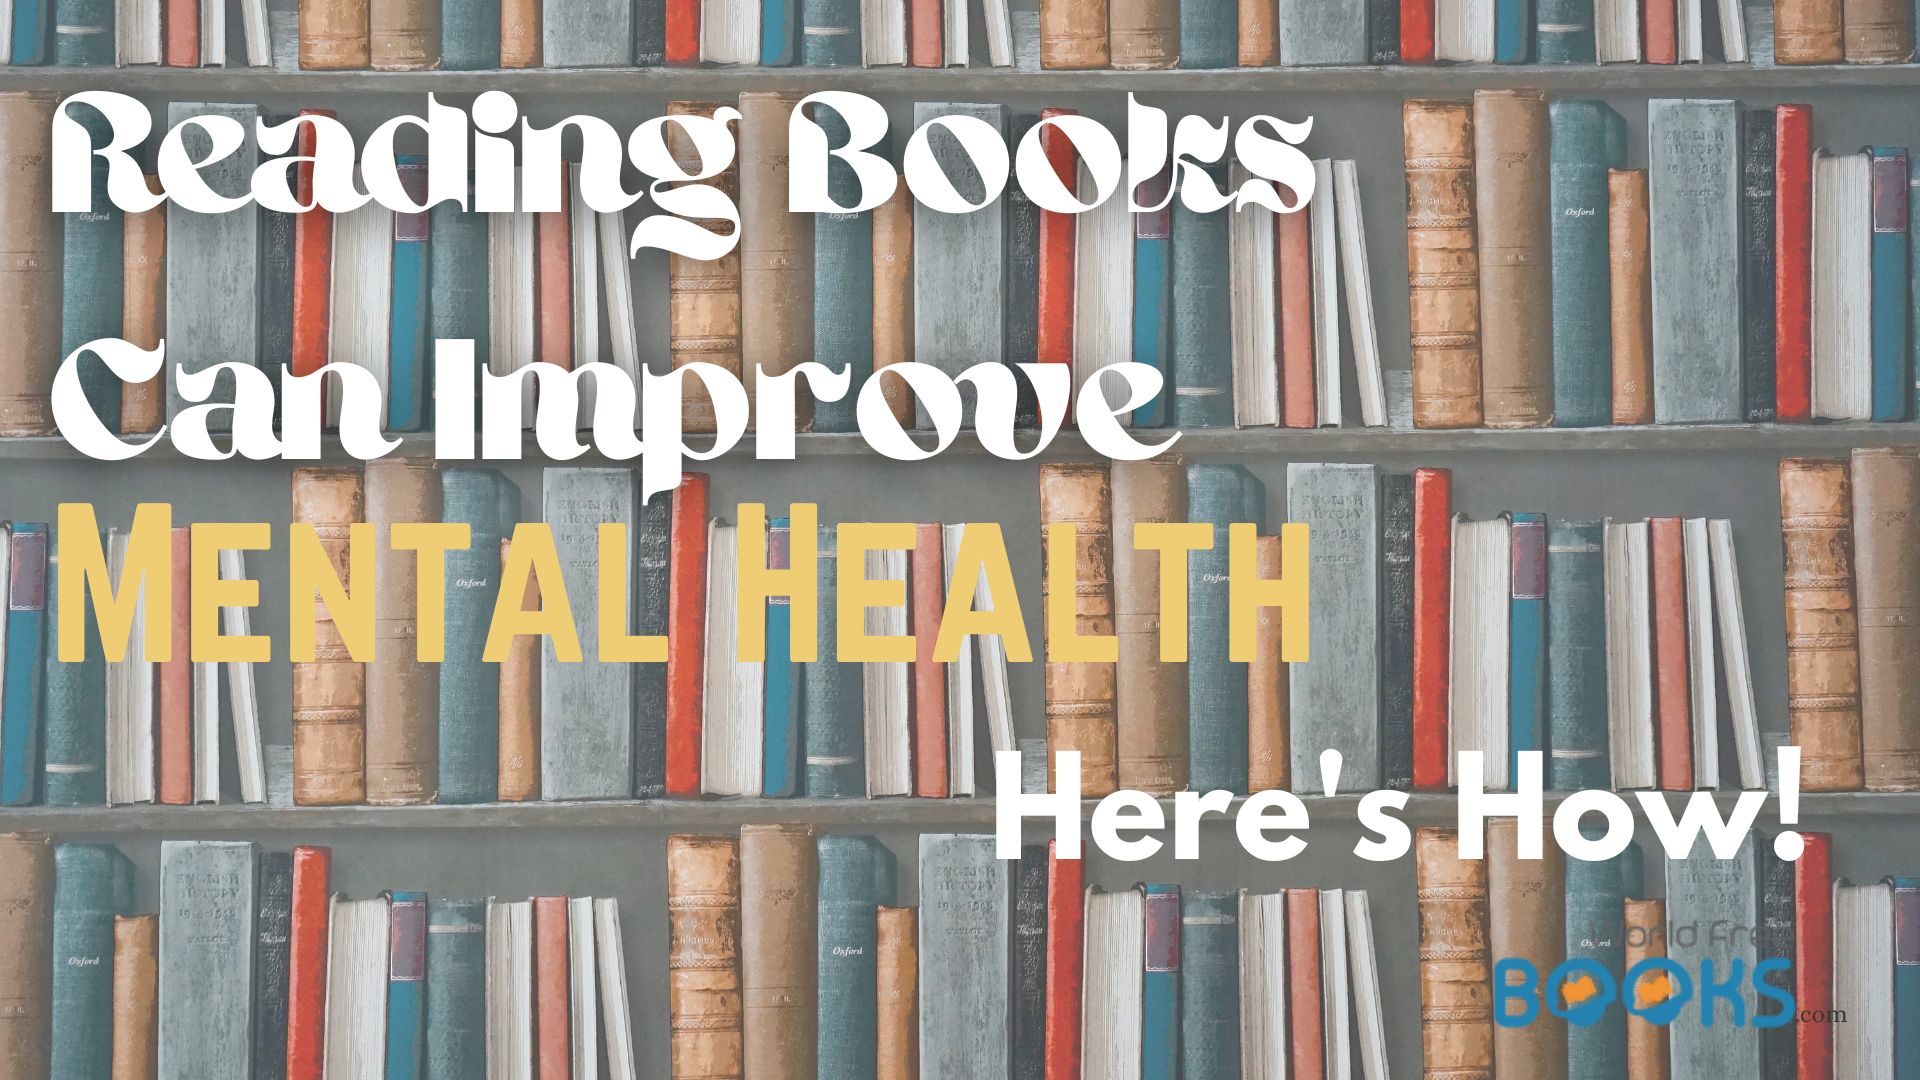 Reading Books Can Improve Mental Health